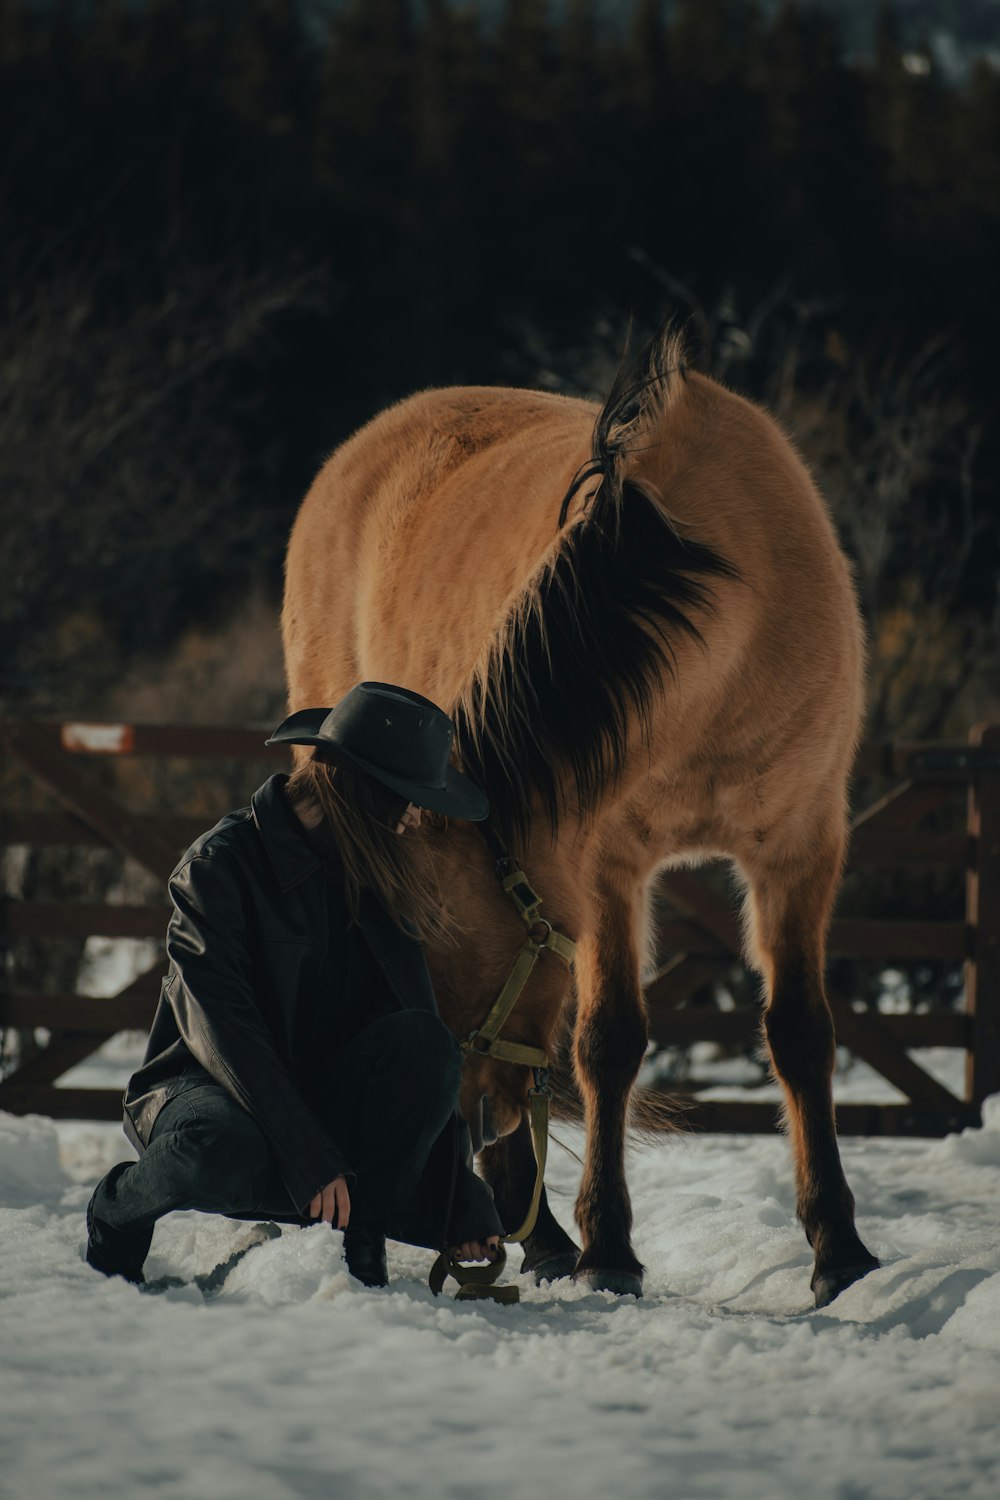 a person kneeling down next to a horse in the snow